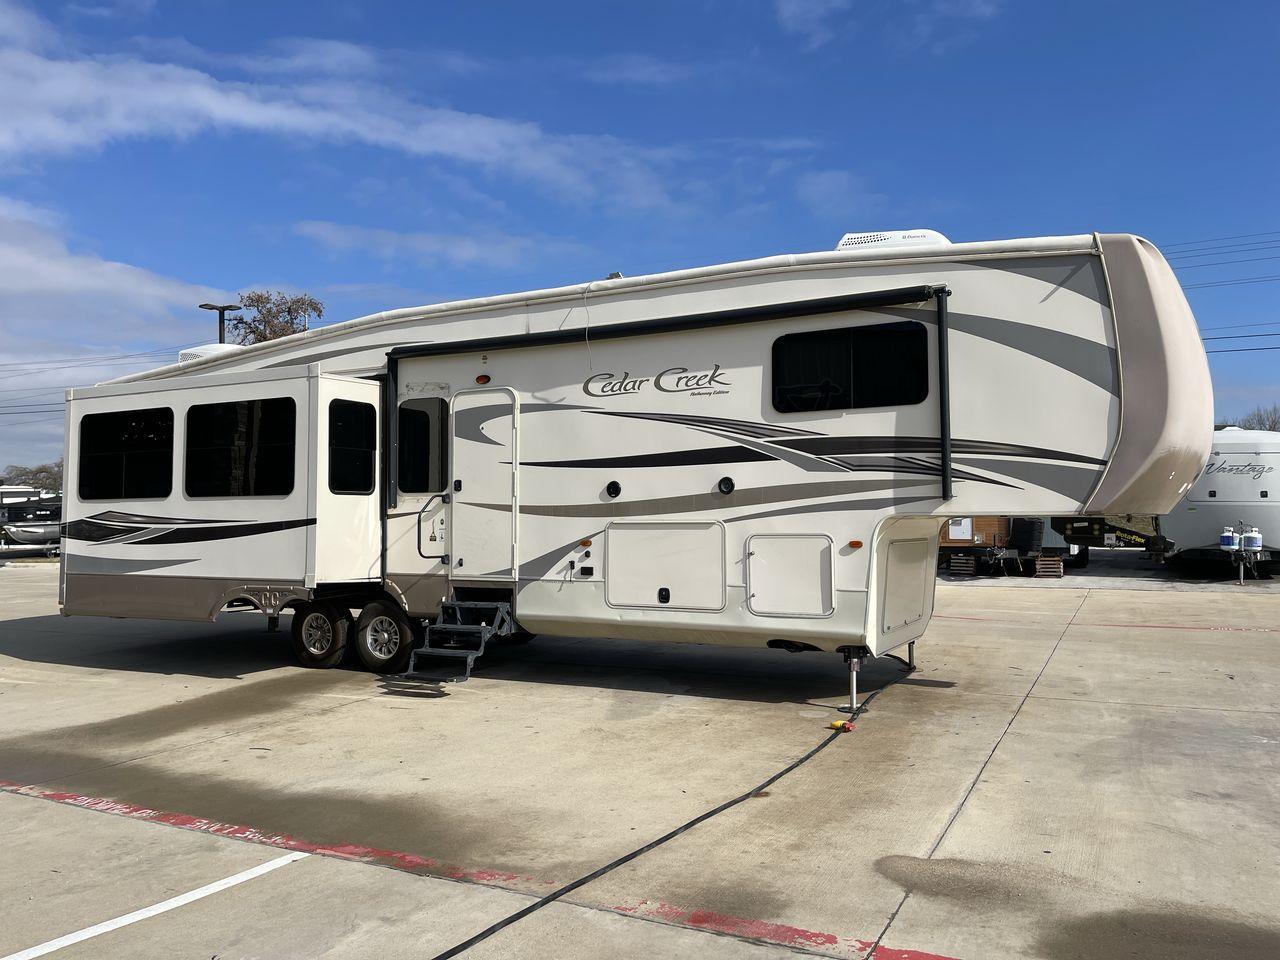 2016 TAN FOREST RIVER CEDAR CREEK 36CKTS (4X4FCRM27GS) , Length: 39.83 ft. | Dry Weight: 12,670 lbs. | Gross Weight: 16,407 lbs. | Slides: 3 transmission, located at 4319 N Main St, Cleburne, TX, 76033, (817) 678-5133, 32.385960, -97.391212 - With a length of 39.83 feet and a dry weight of 12,670 pounds, the 2016 Forest River Cedar Creek 36CKTS Fifth Wheel offers comfort and space on the road. This fifth wheel is made to be comfortable and last a long time. The inside is nicely finished with high-quality materials, and the two opposing s - Photo #23